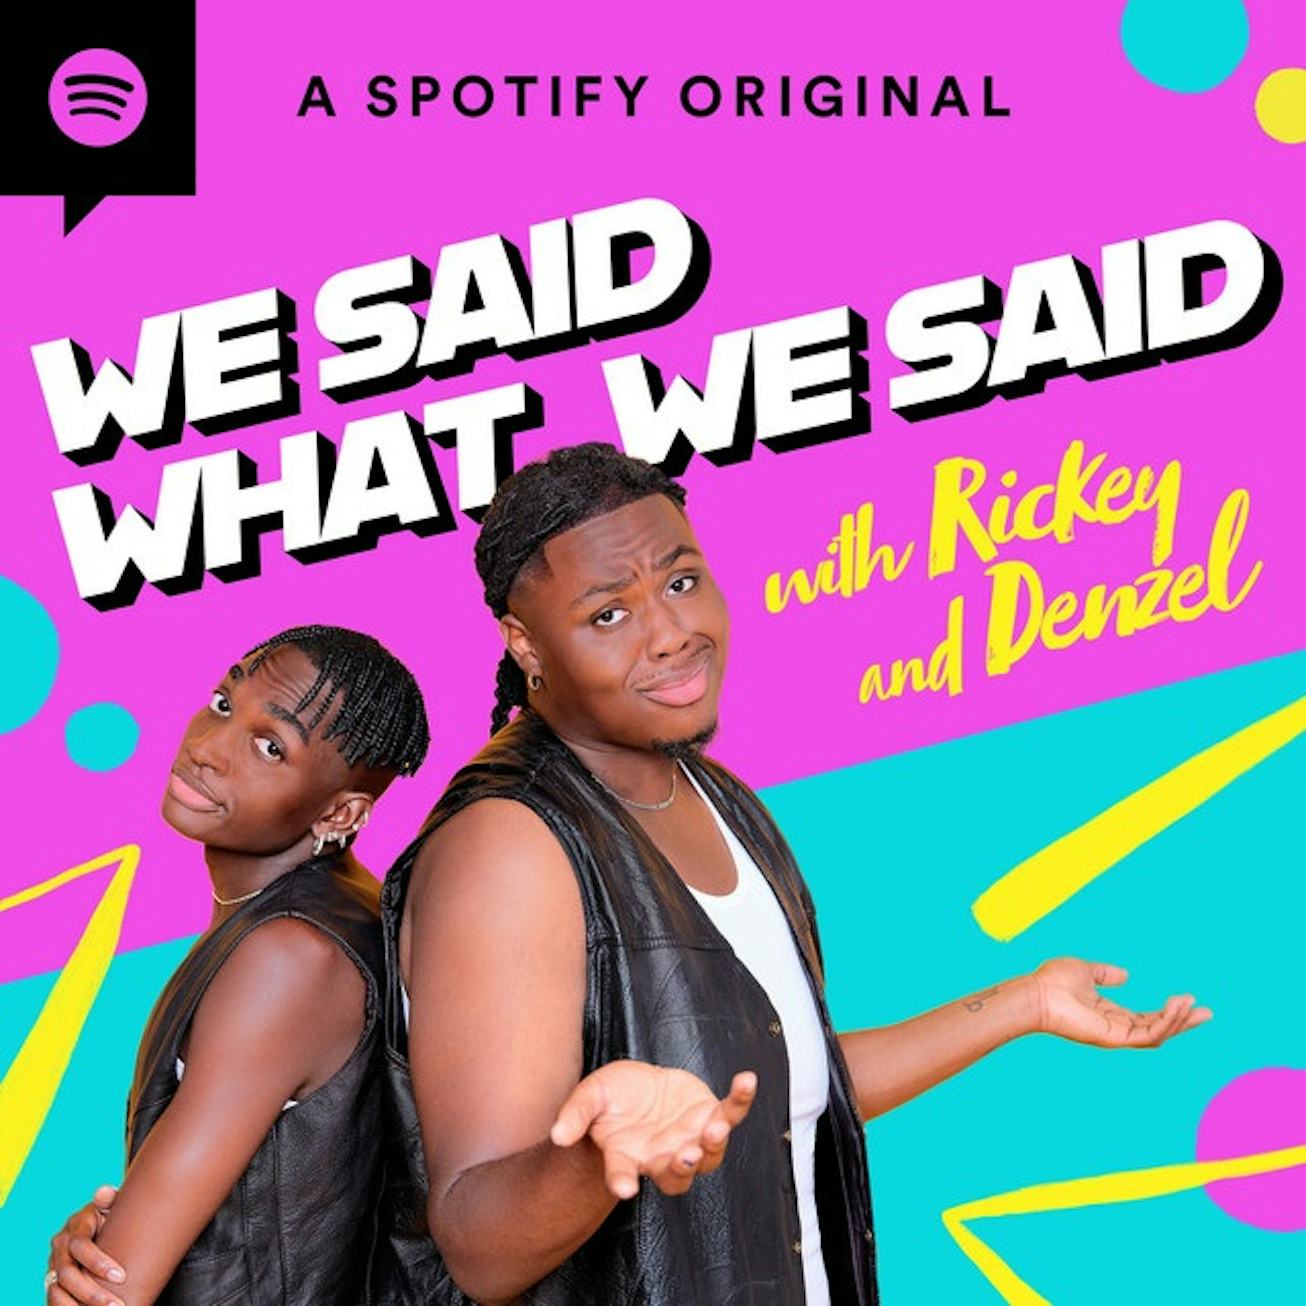 Rickey Thompson and Denzel Dion 'We Said What We Said' Spotify podcast series.